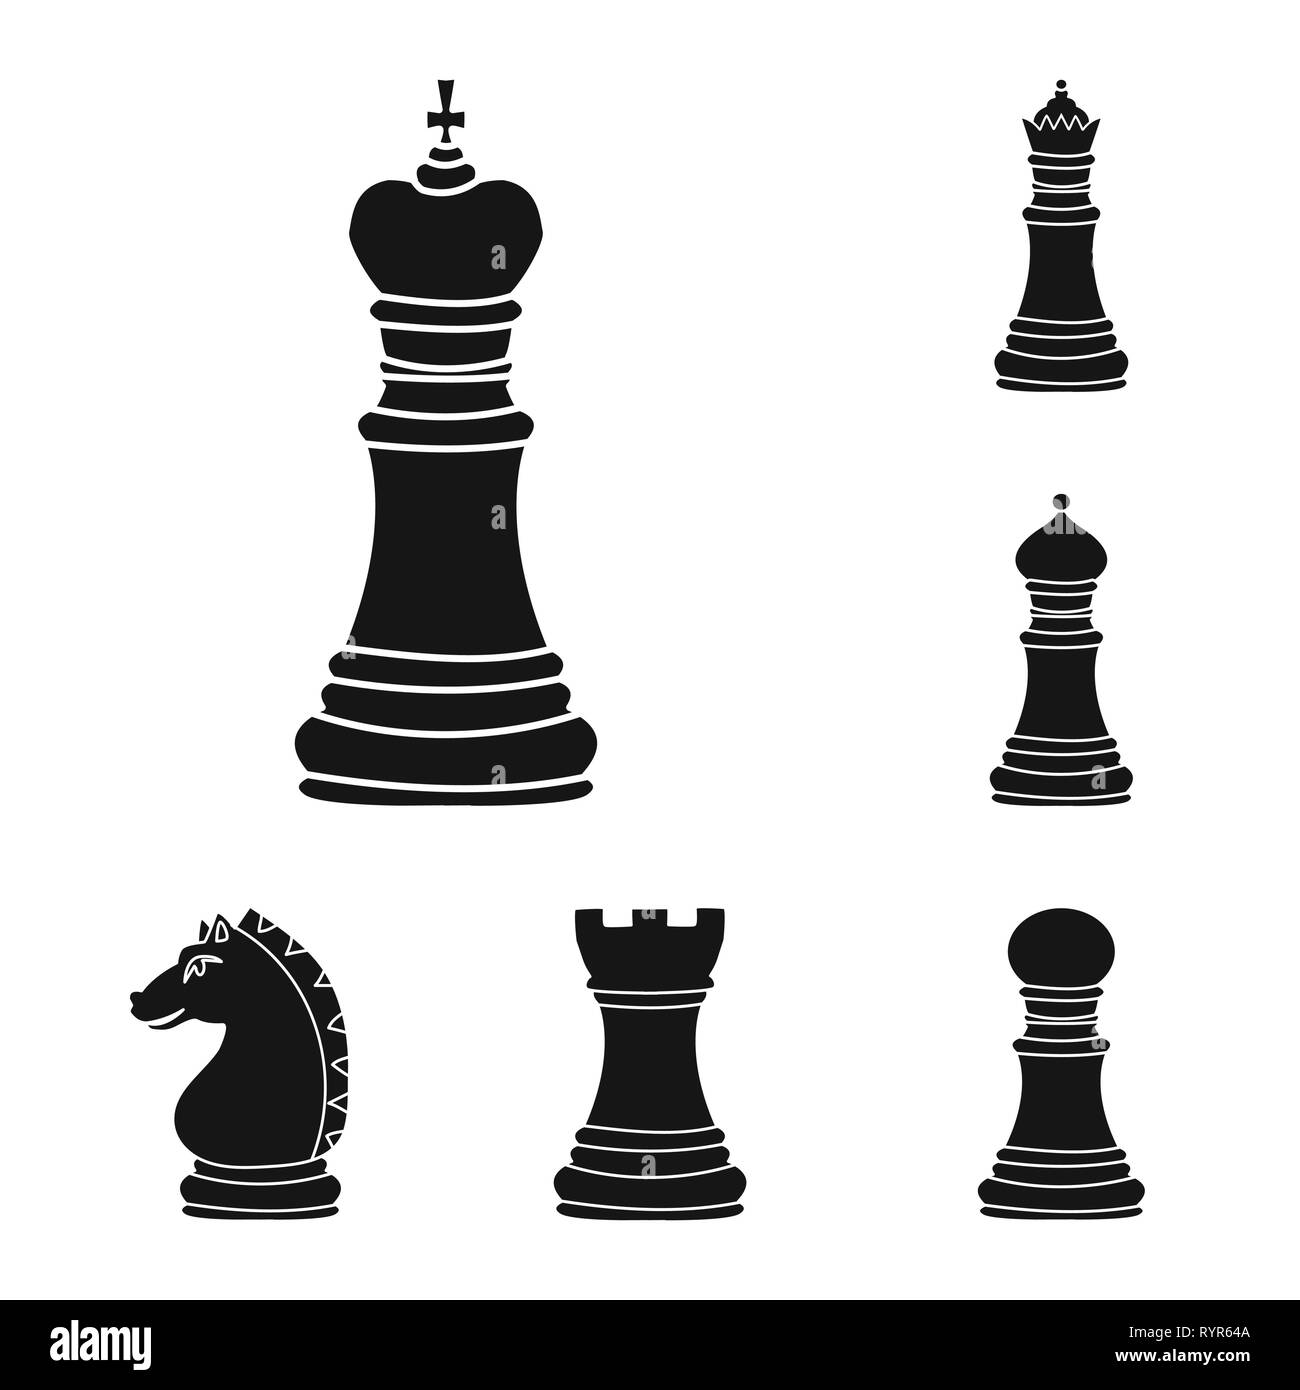 king,queen,bishop,knight,rook,pawn,board,strategic,horse,white,championship,castle,business,mate,tower,figure,leadership,check,head,network,counter,leader,change,manager,sport,tournament,goal,vision,club,target,chess,game,piece,strategy,tactical,play,checkmate,thin,set,vector,icon,illustration,isolated,collection,design,element,graphic,sign,black,simple Vector Vectors , Stock Vector